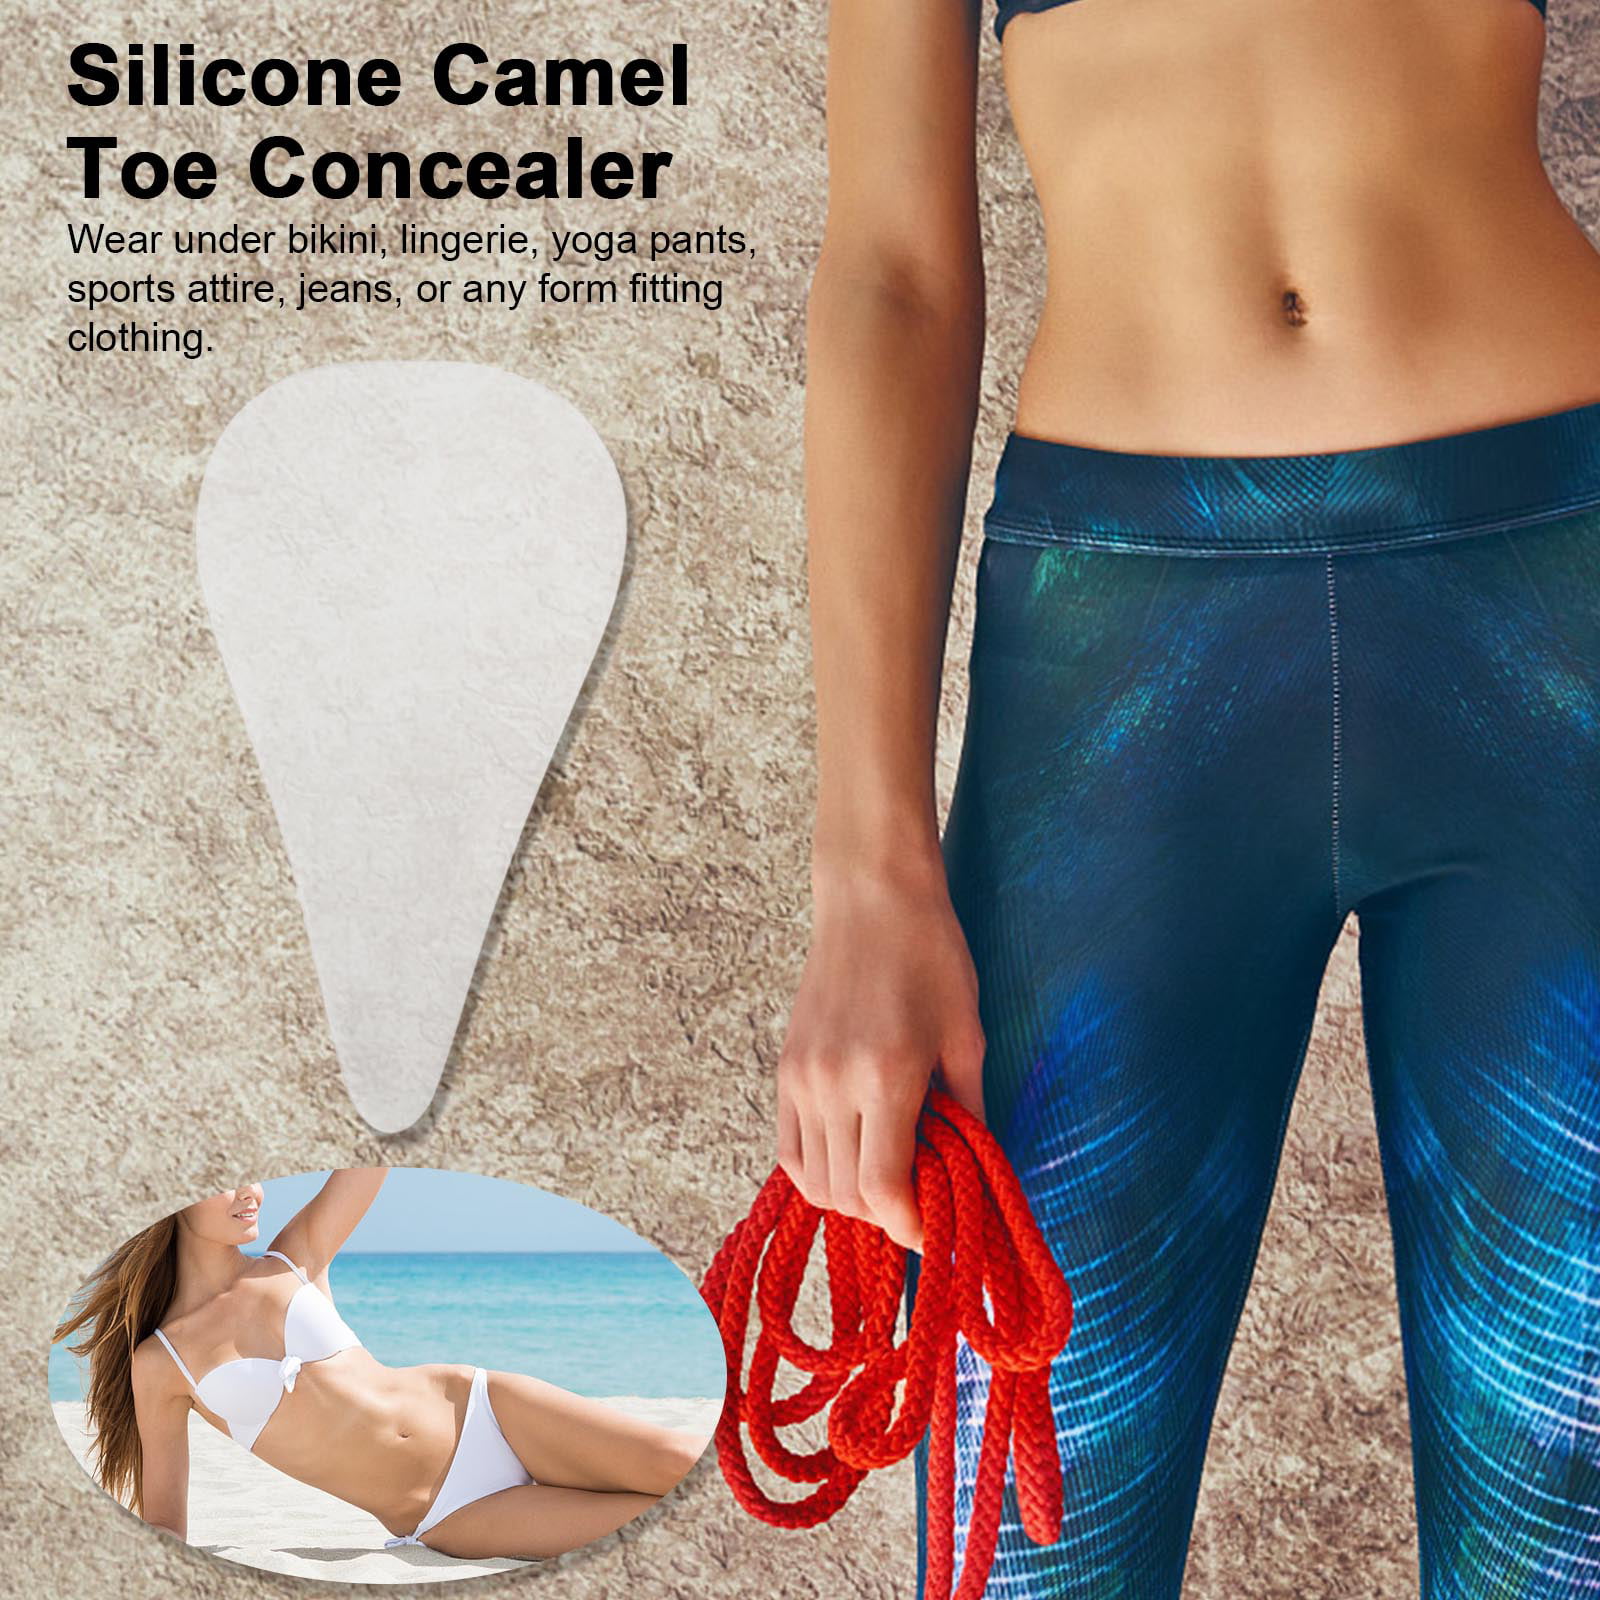 ABOOFAN 2pcs Silicone Camel Toe Concealer Waterproof Adhesive Invisible Cover Seamless Guard for Women Leggings Swimwear Activewear